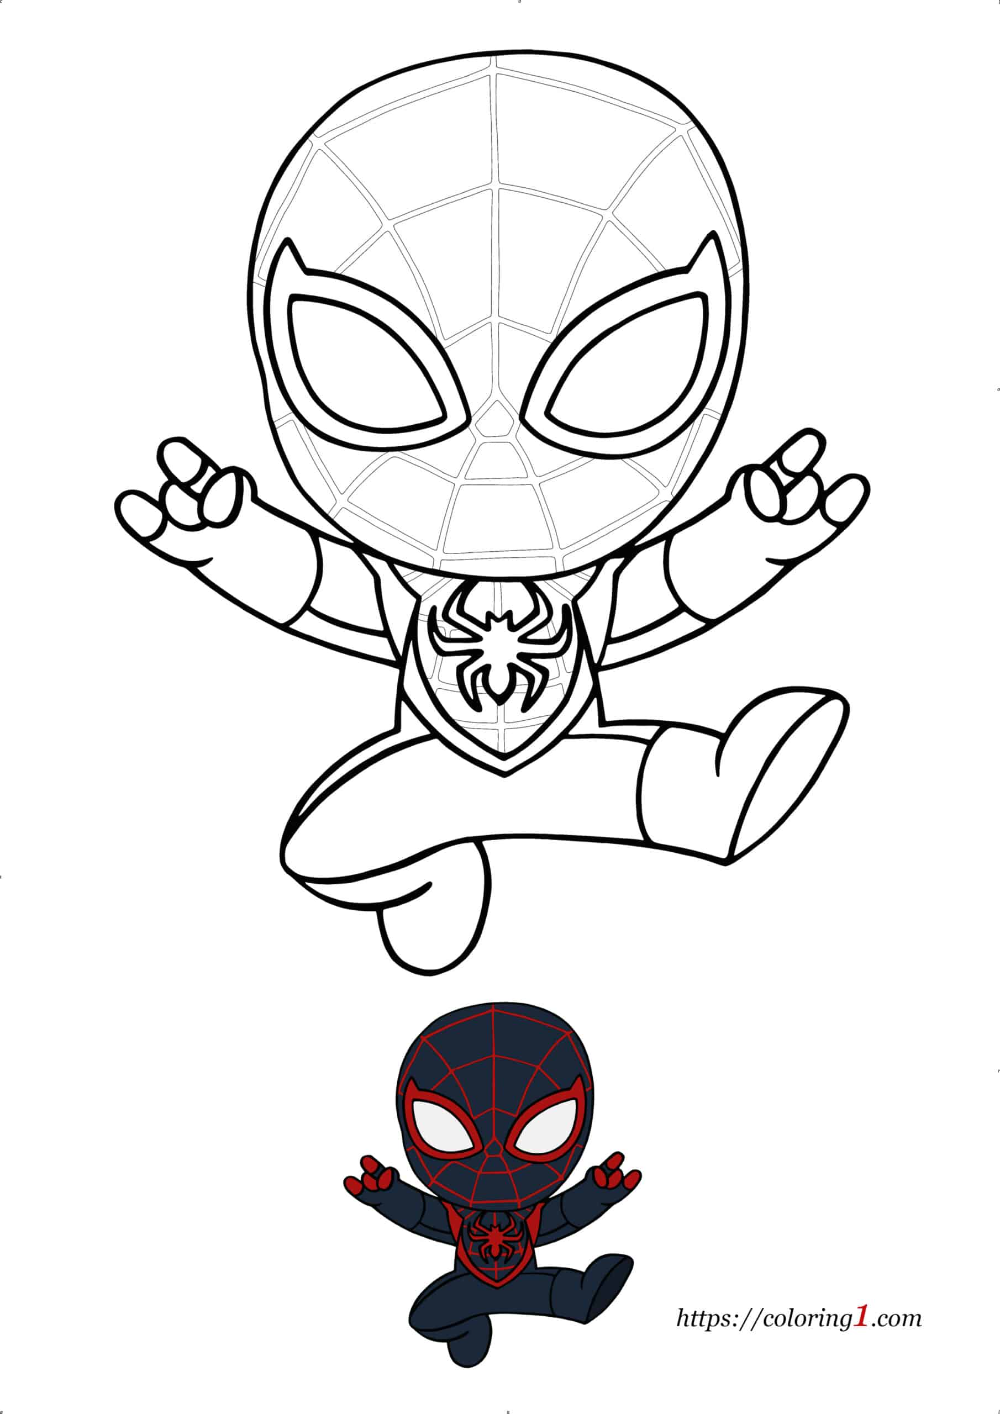 Cute miles morales spiderman coloring pages